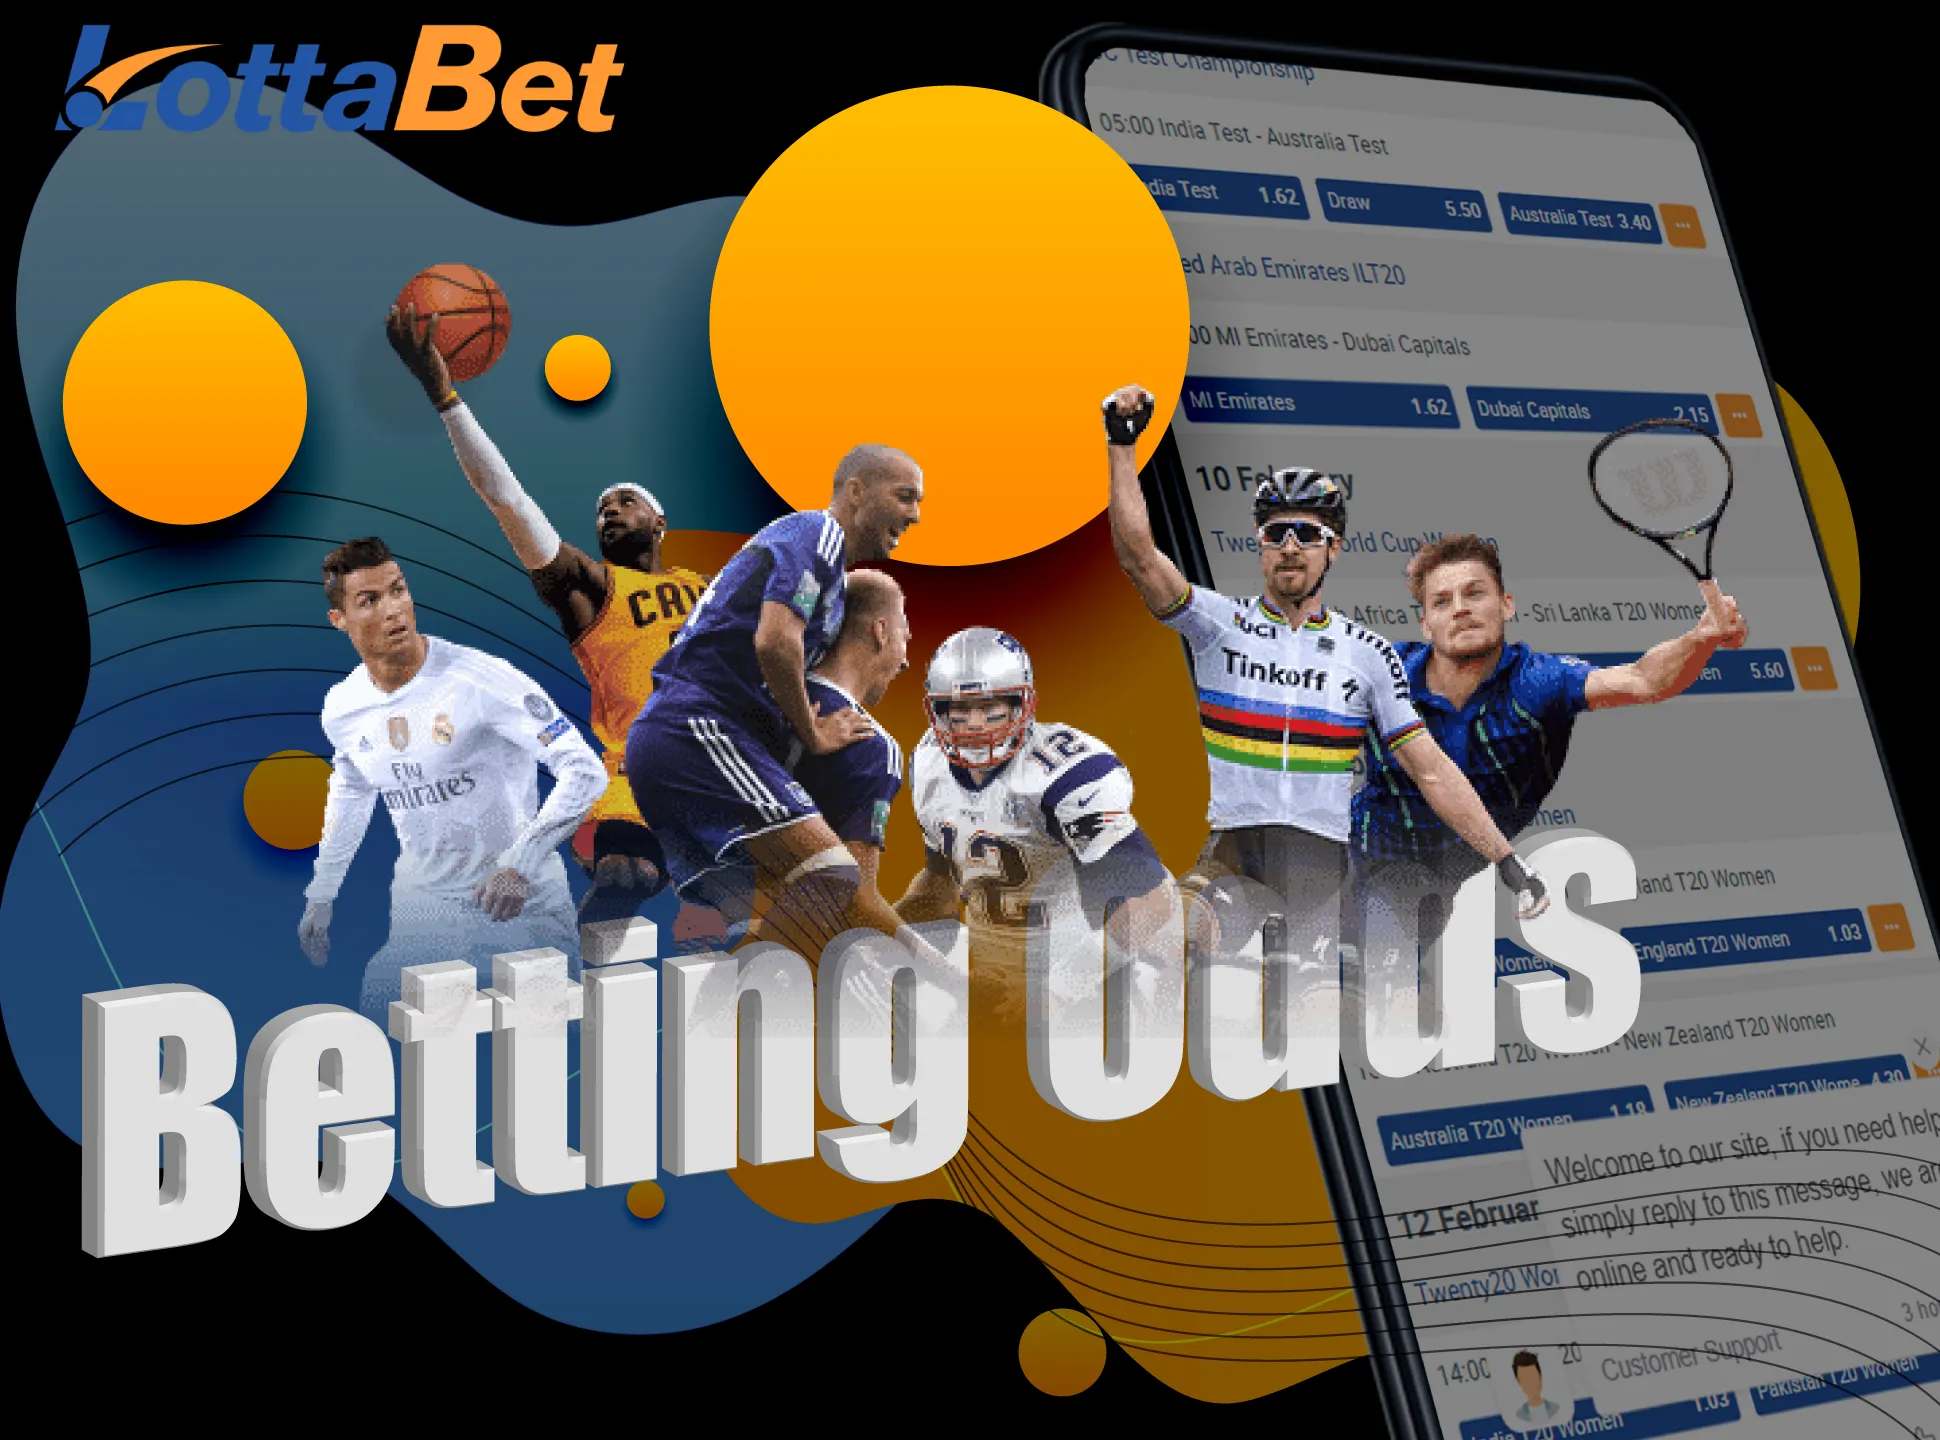 You will find profitable odds on the Lottabet sports app.